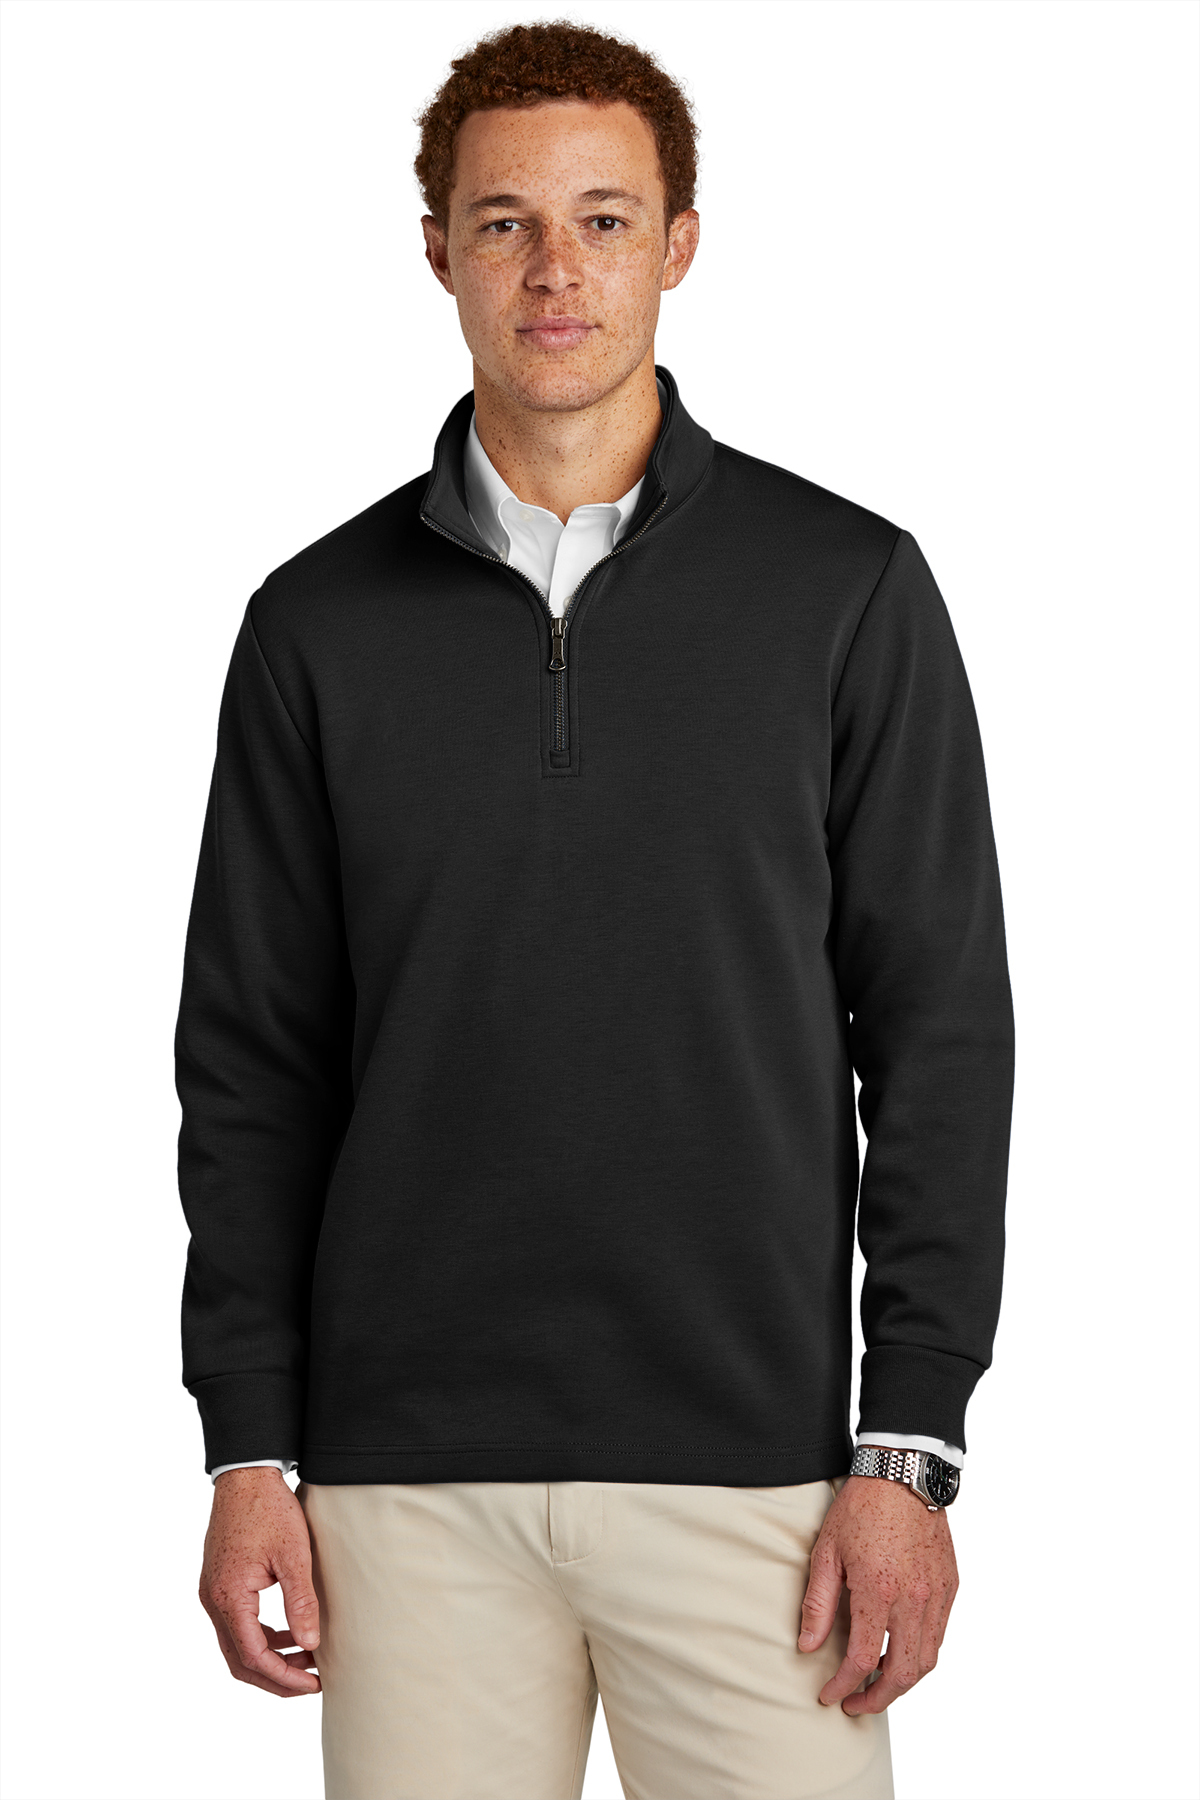 Brooks Brothers Double-Knit 1/4-Zip | Product | Company Casuals